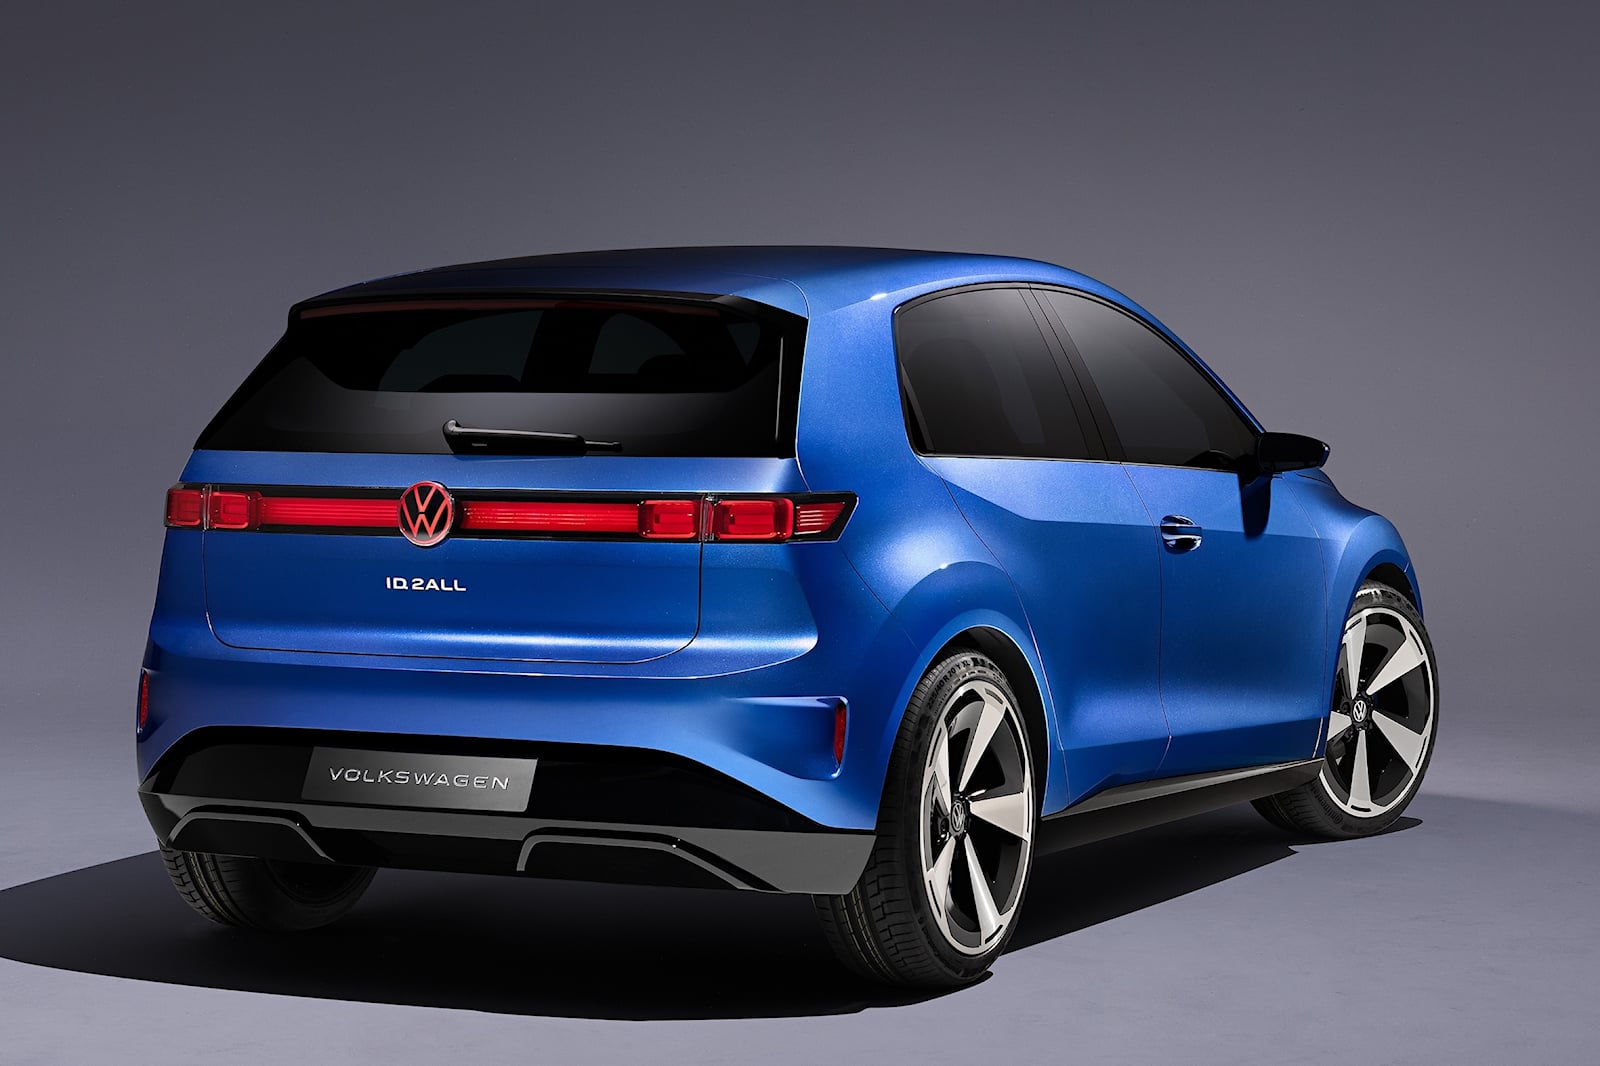 Volkswagen ID. 2all Is Getting A Hot GTI Or GTX Variant